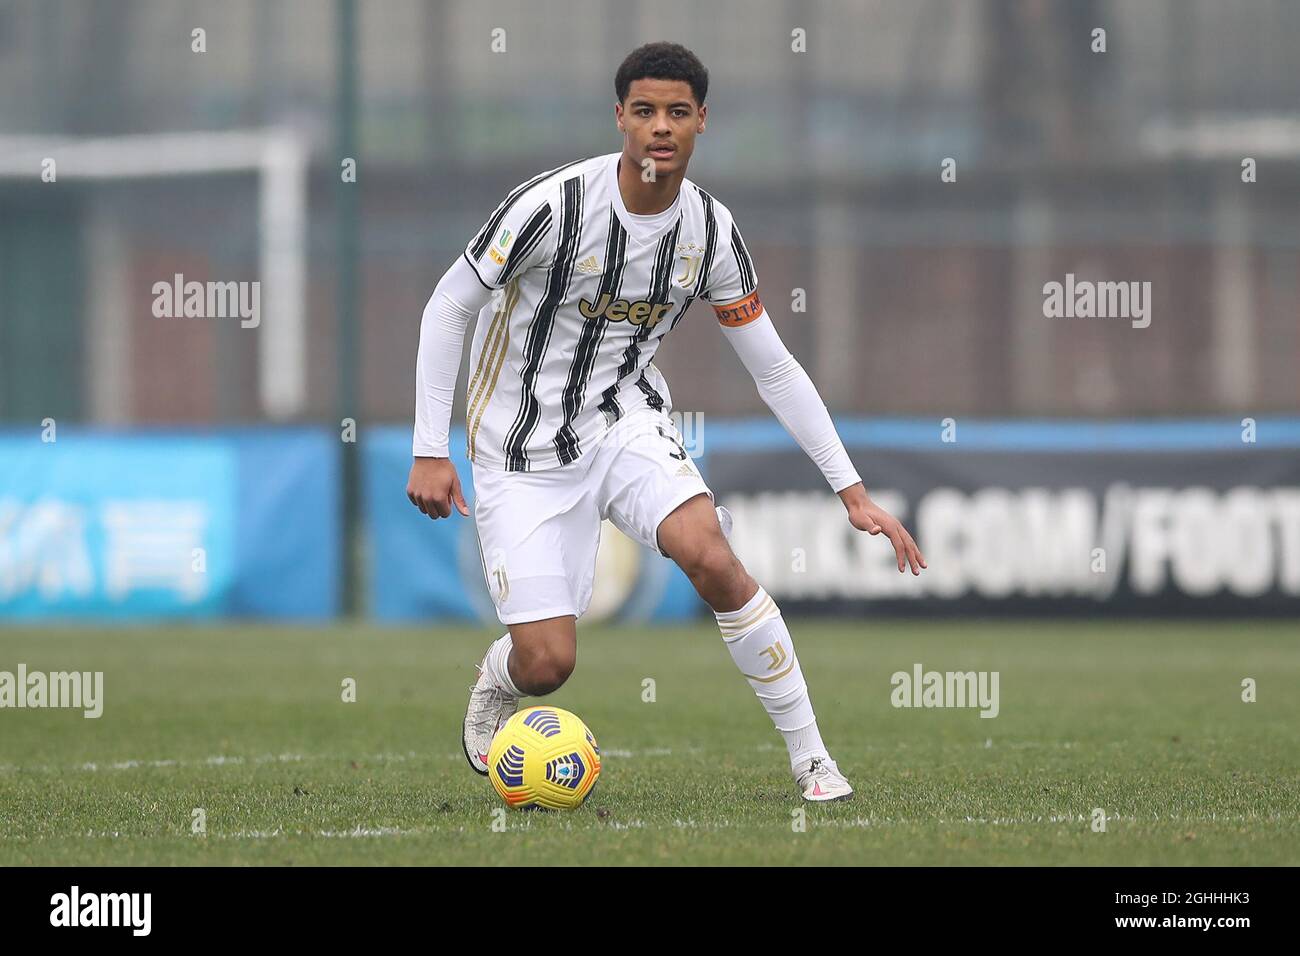 Koni De Winter of Juventus during the Primavera 1 match at Suning Youth Development Center, Milano. Picture date: 20th February 2021. Picture credit should read: Jonathan Moscrop/Sportimage via PA Images Stock Photo